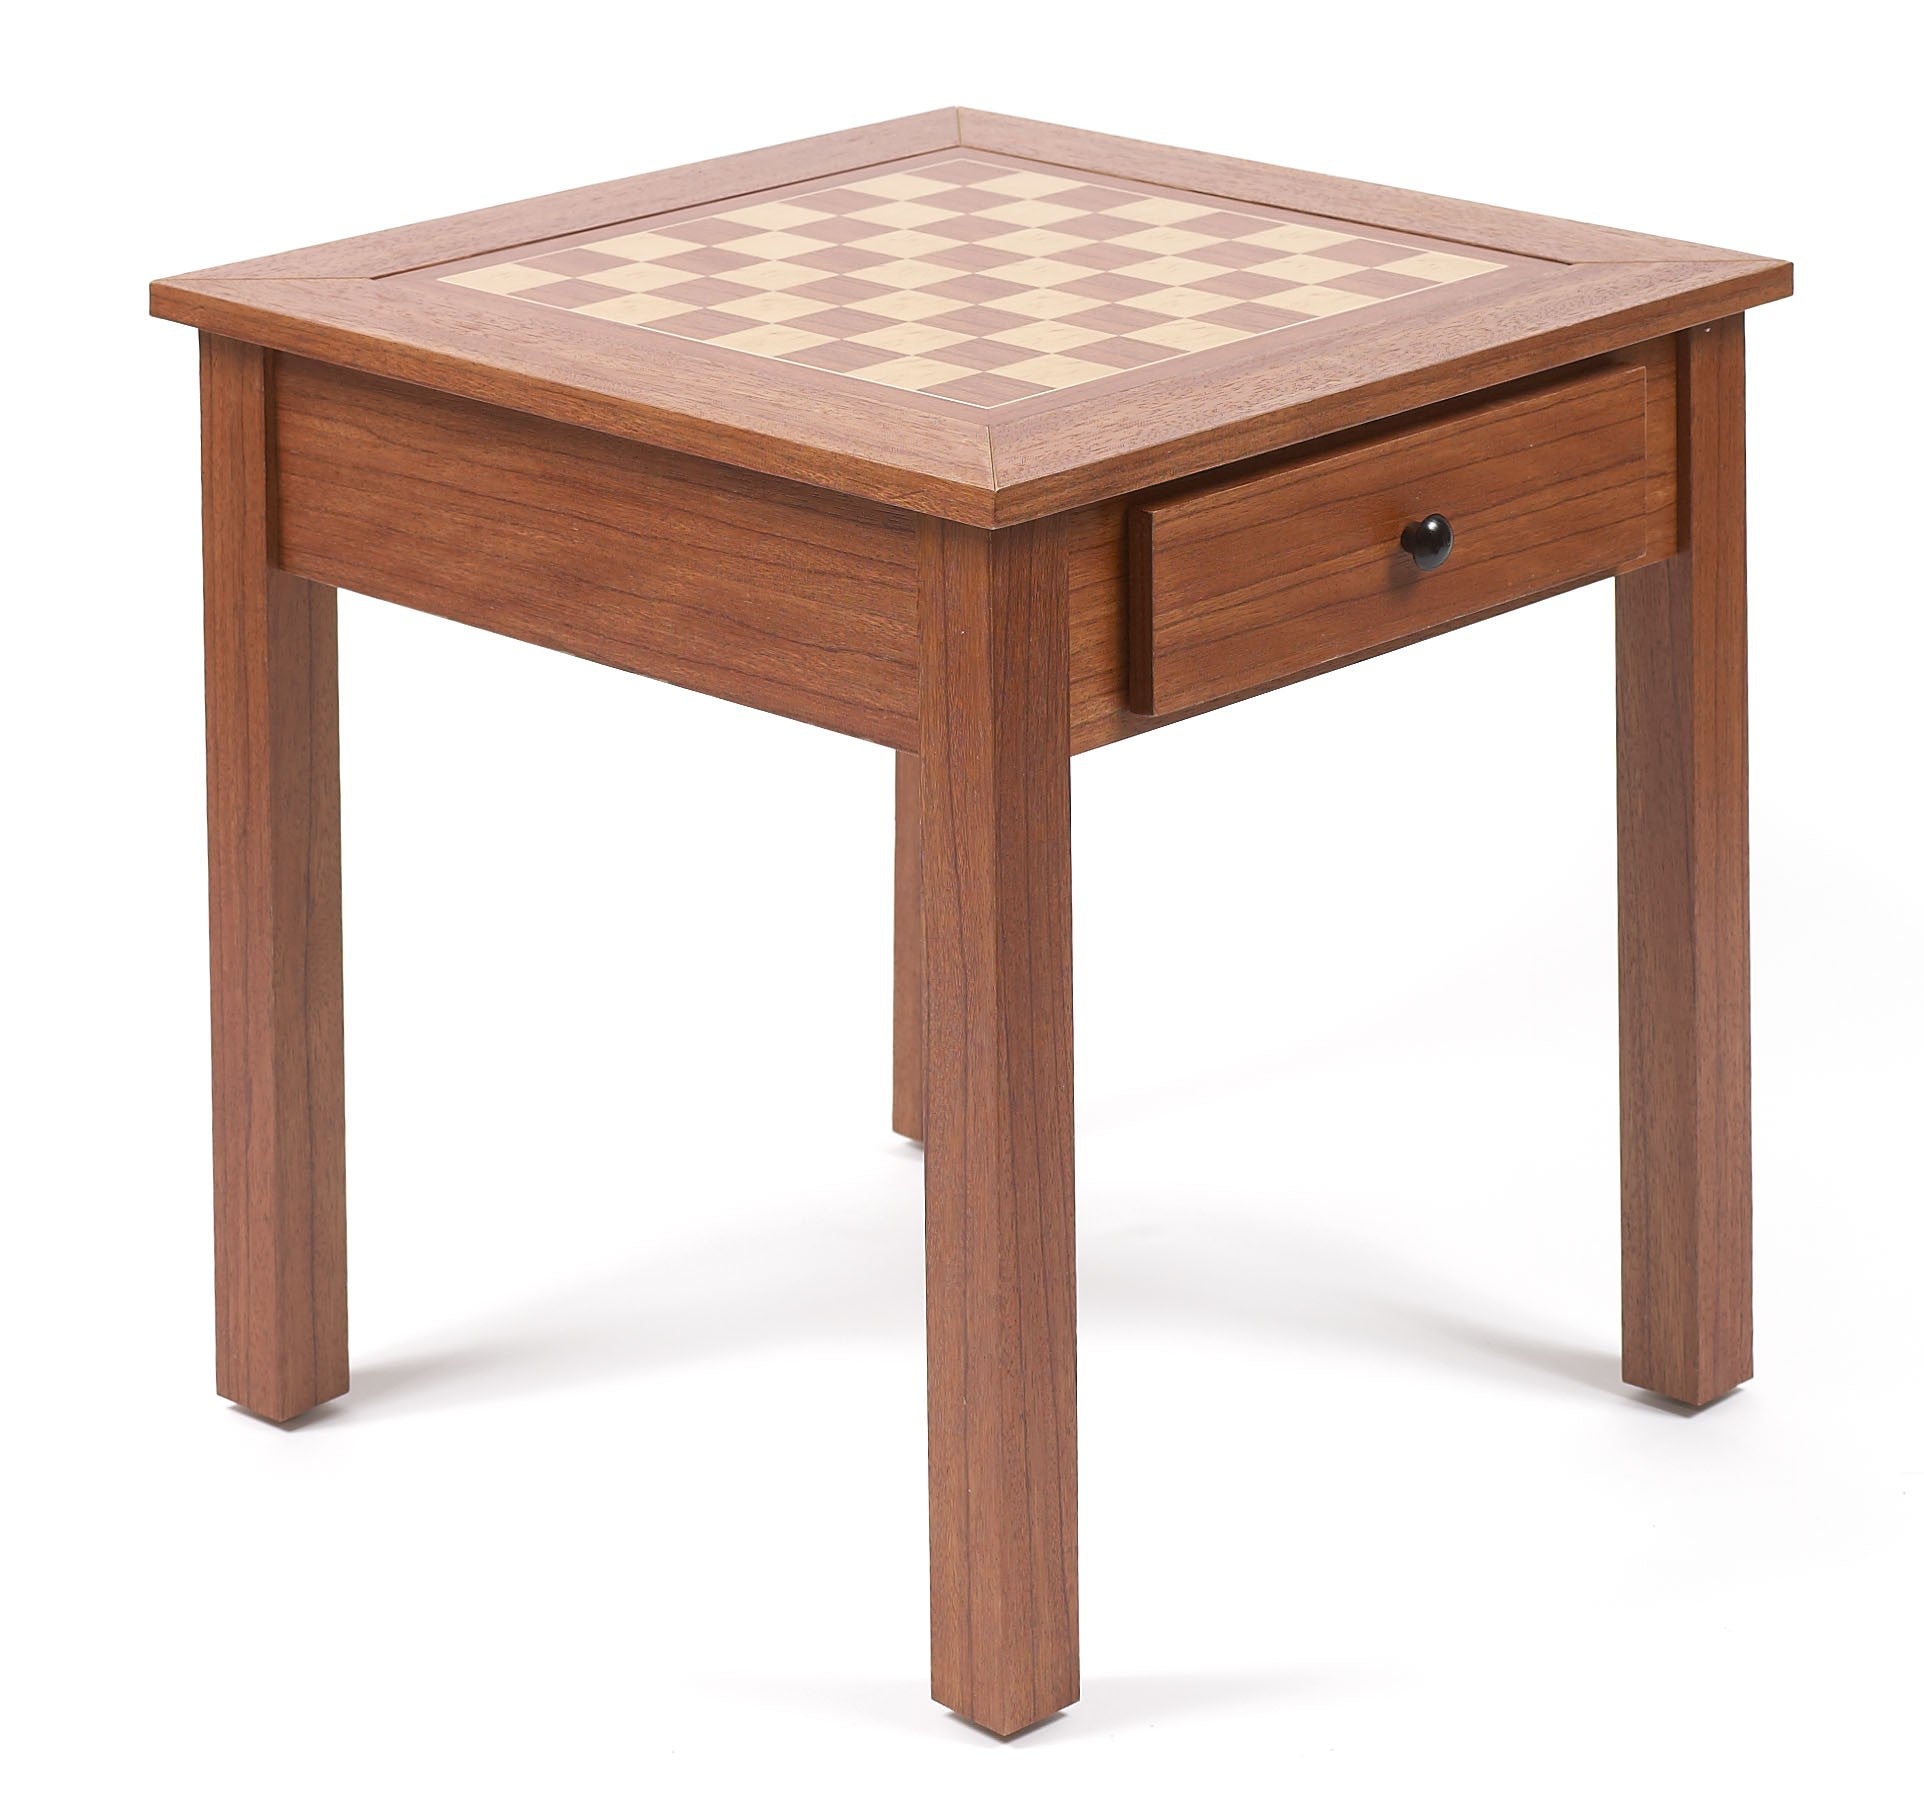 19 inch 4-in-1 Chess/Checkers/Backgammon & End Table (1.5 Inch Squares)